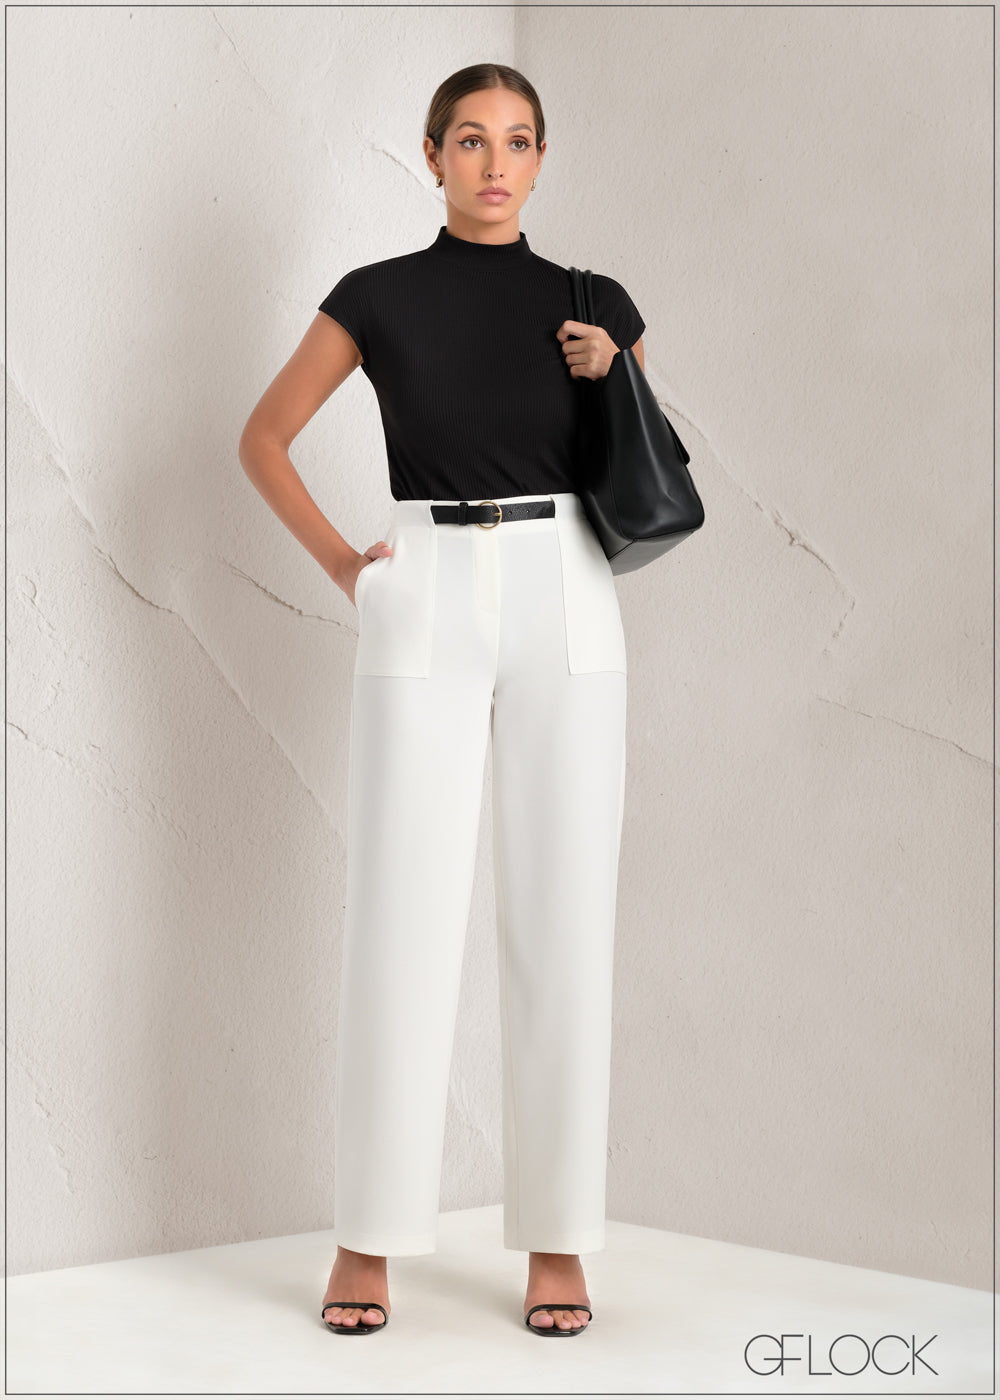 Elevate Your Style with High Waist Satin Pants - 30% Off!  Pants for women,  Women long sleeve dress, Wide leg pants